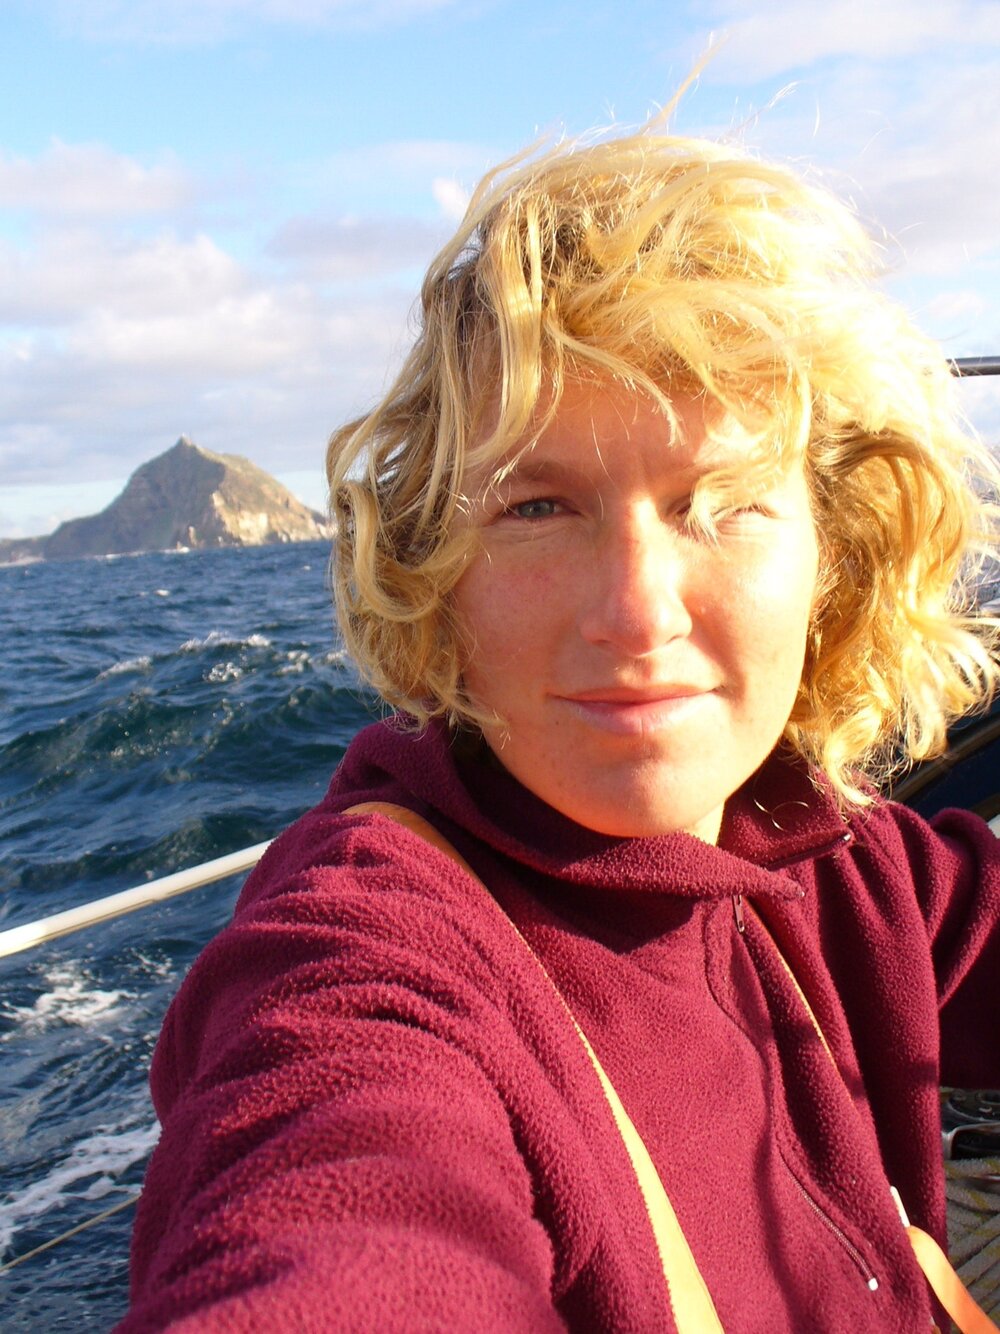 A selfie of Kirsten at sea with the choppy waters in the background and the sun on her face. Photo: Kirsten Neuschäfer